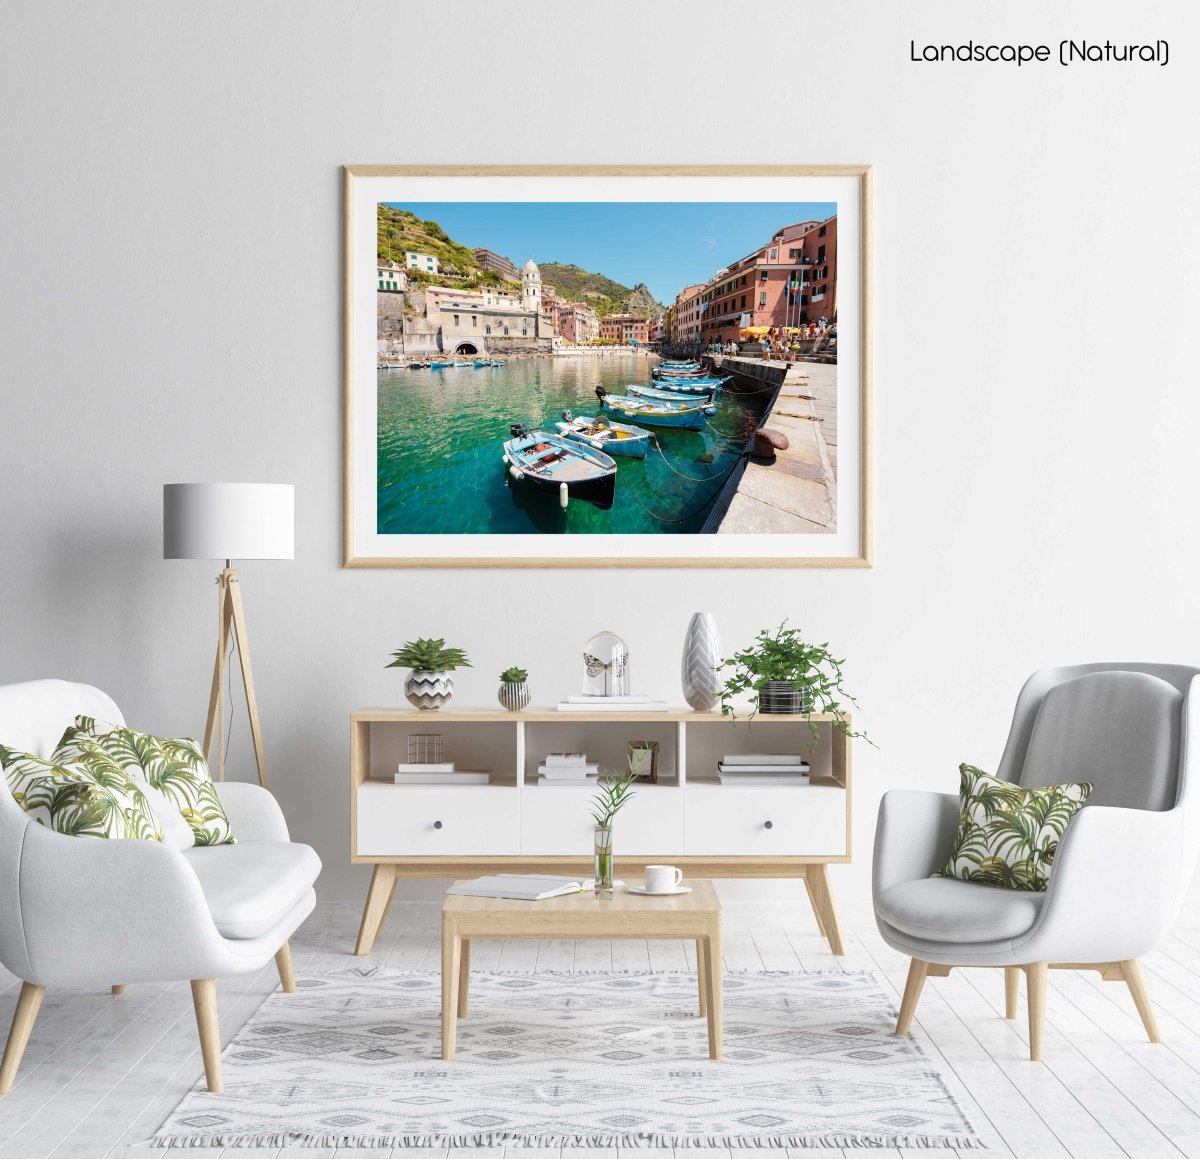 Boats lined up at Promenade in Vernazza Cinque Terre in a natural fine art frame